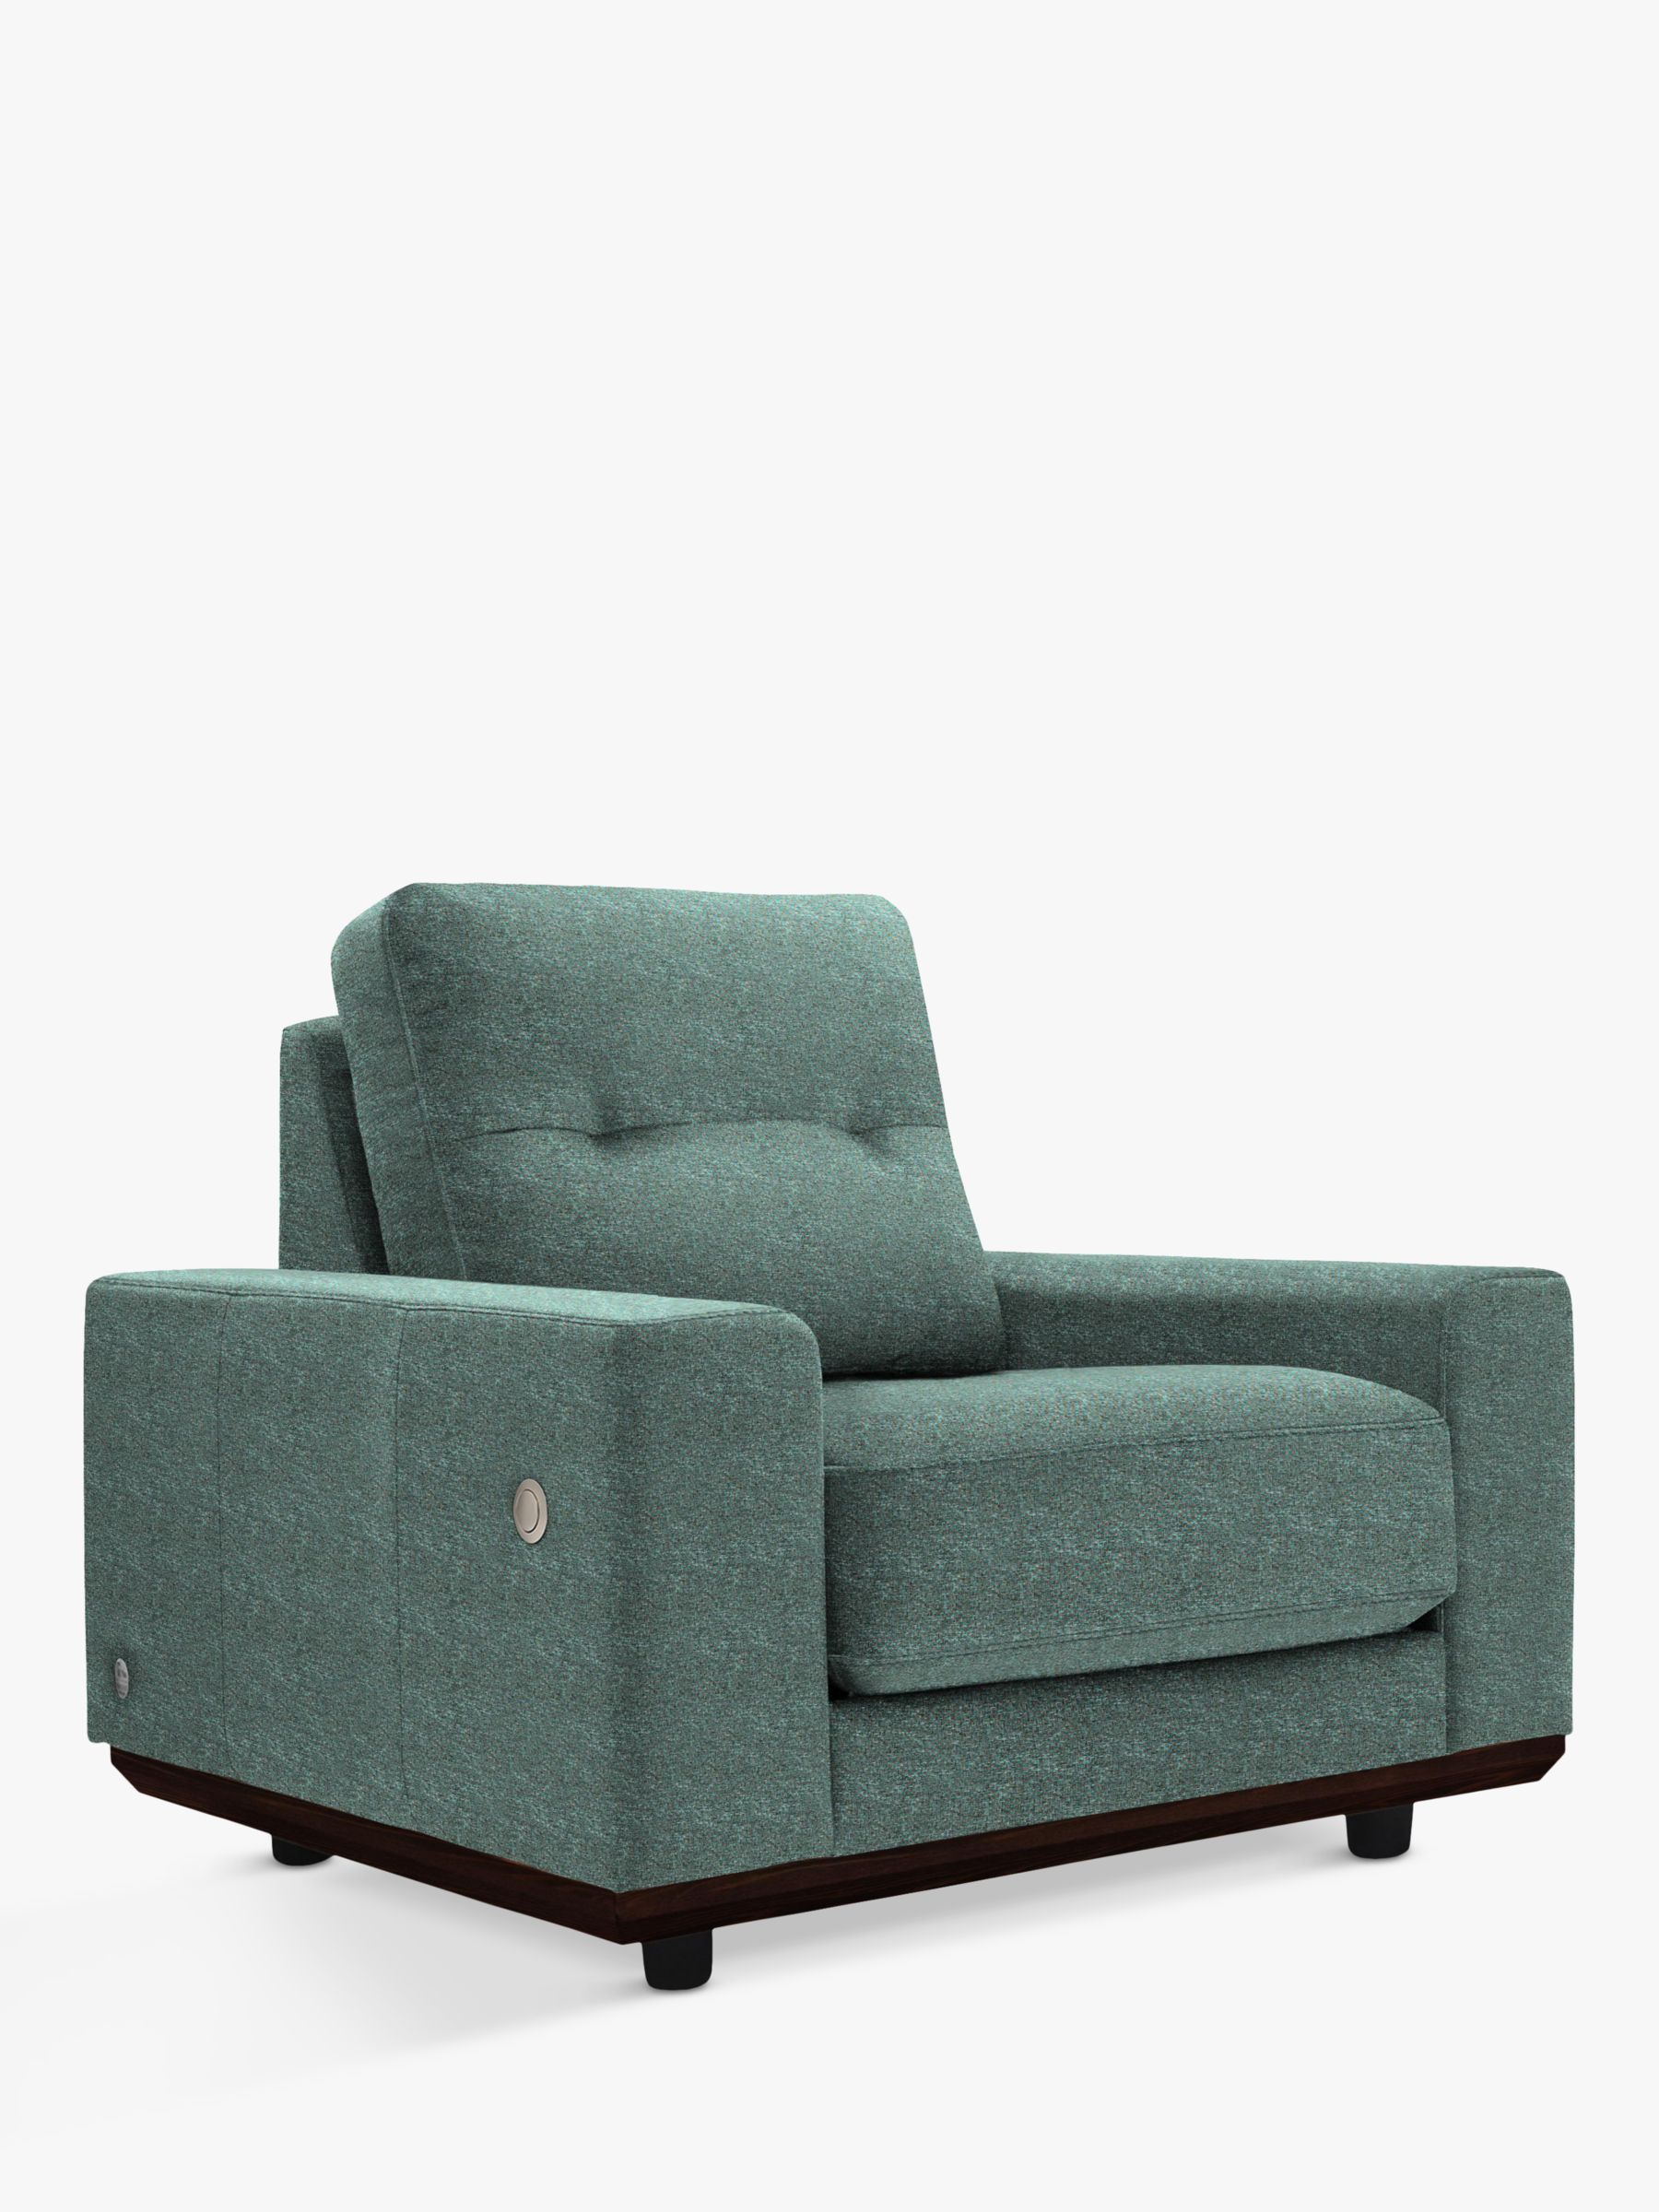 The Seventy One Range, G Plan Vintage The Seventy One with USB Charging Port Armchair, Sherbert Teal